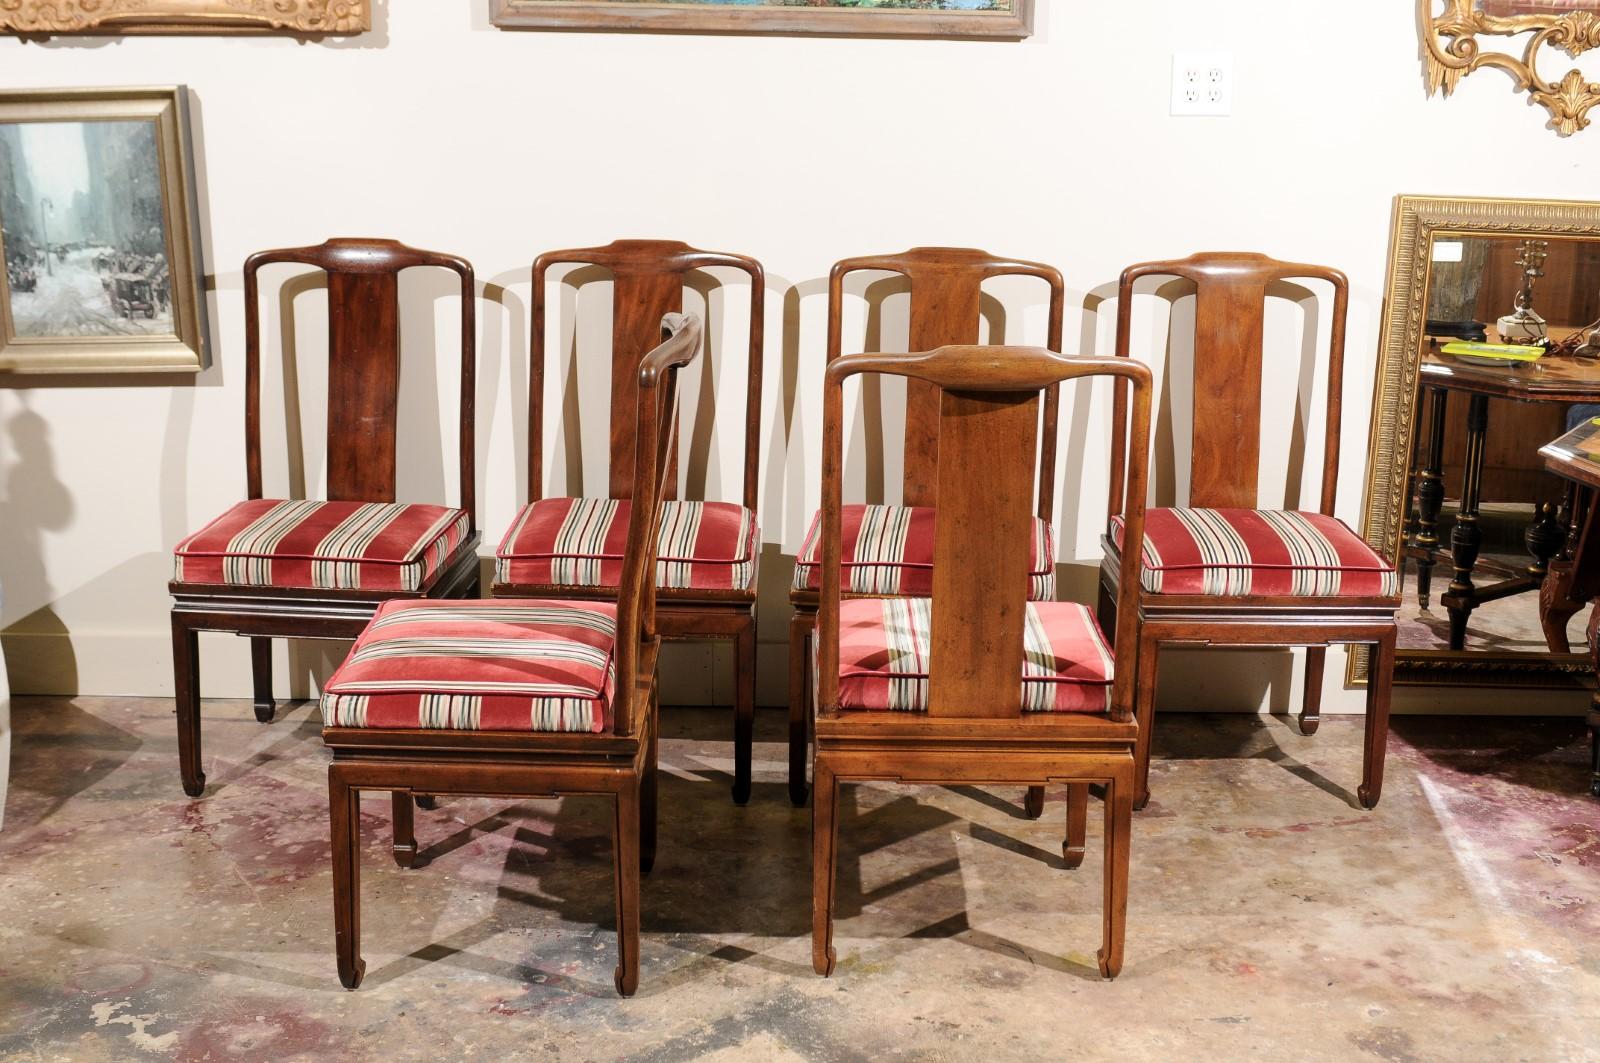 The set of six vintage Chinese high back chairs, believed to be Henredon, are very sturdy, heavy and in excellent condition.
Beautiful wood frame with fabric seats attached.